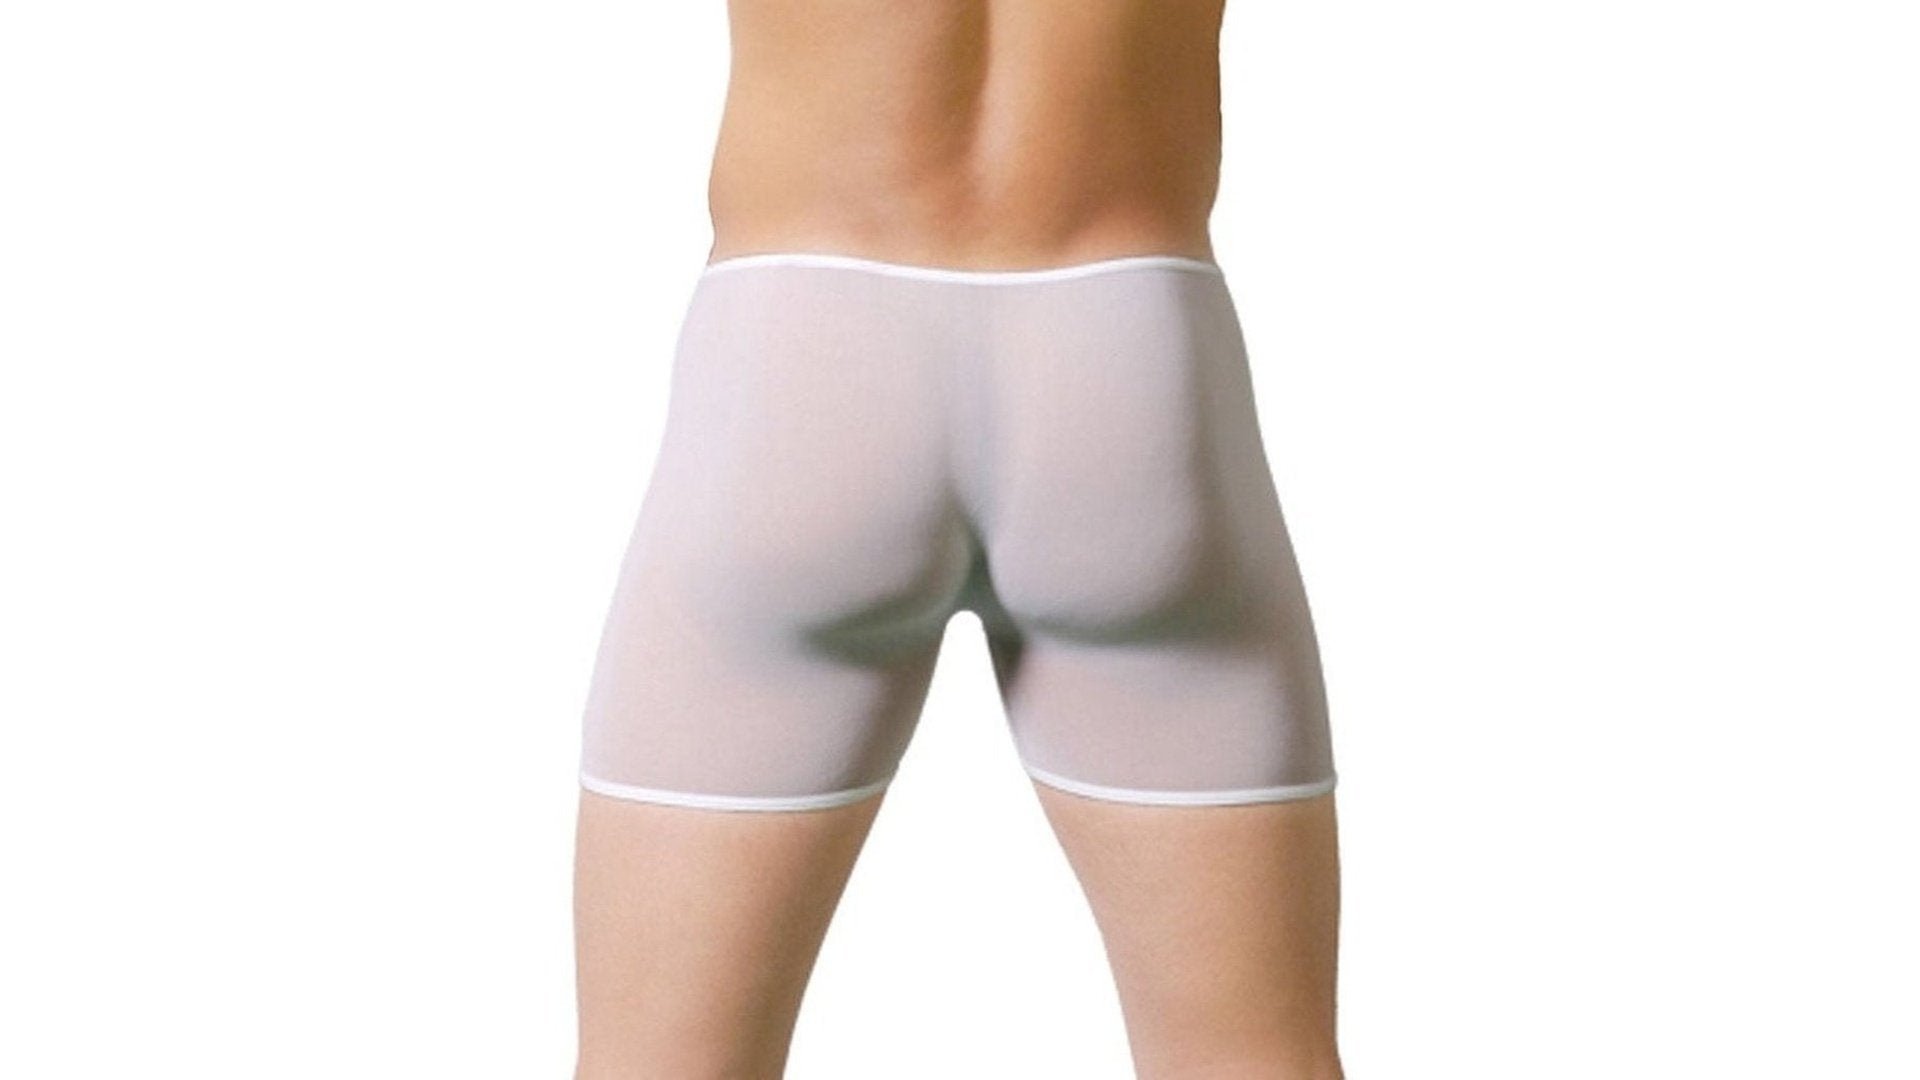 The Fabulous Guide to Super-Snug Gay Underwear